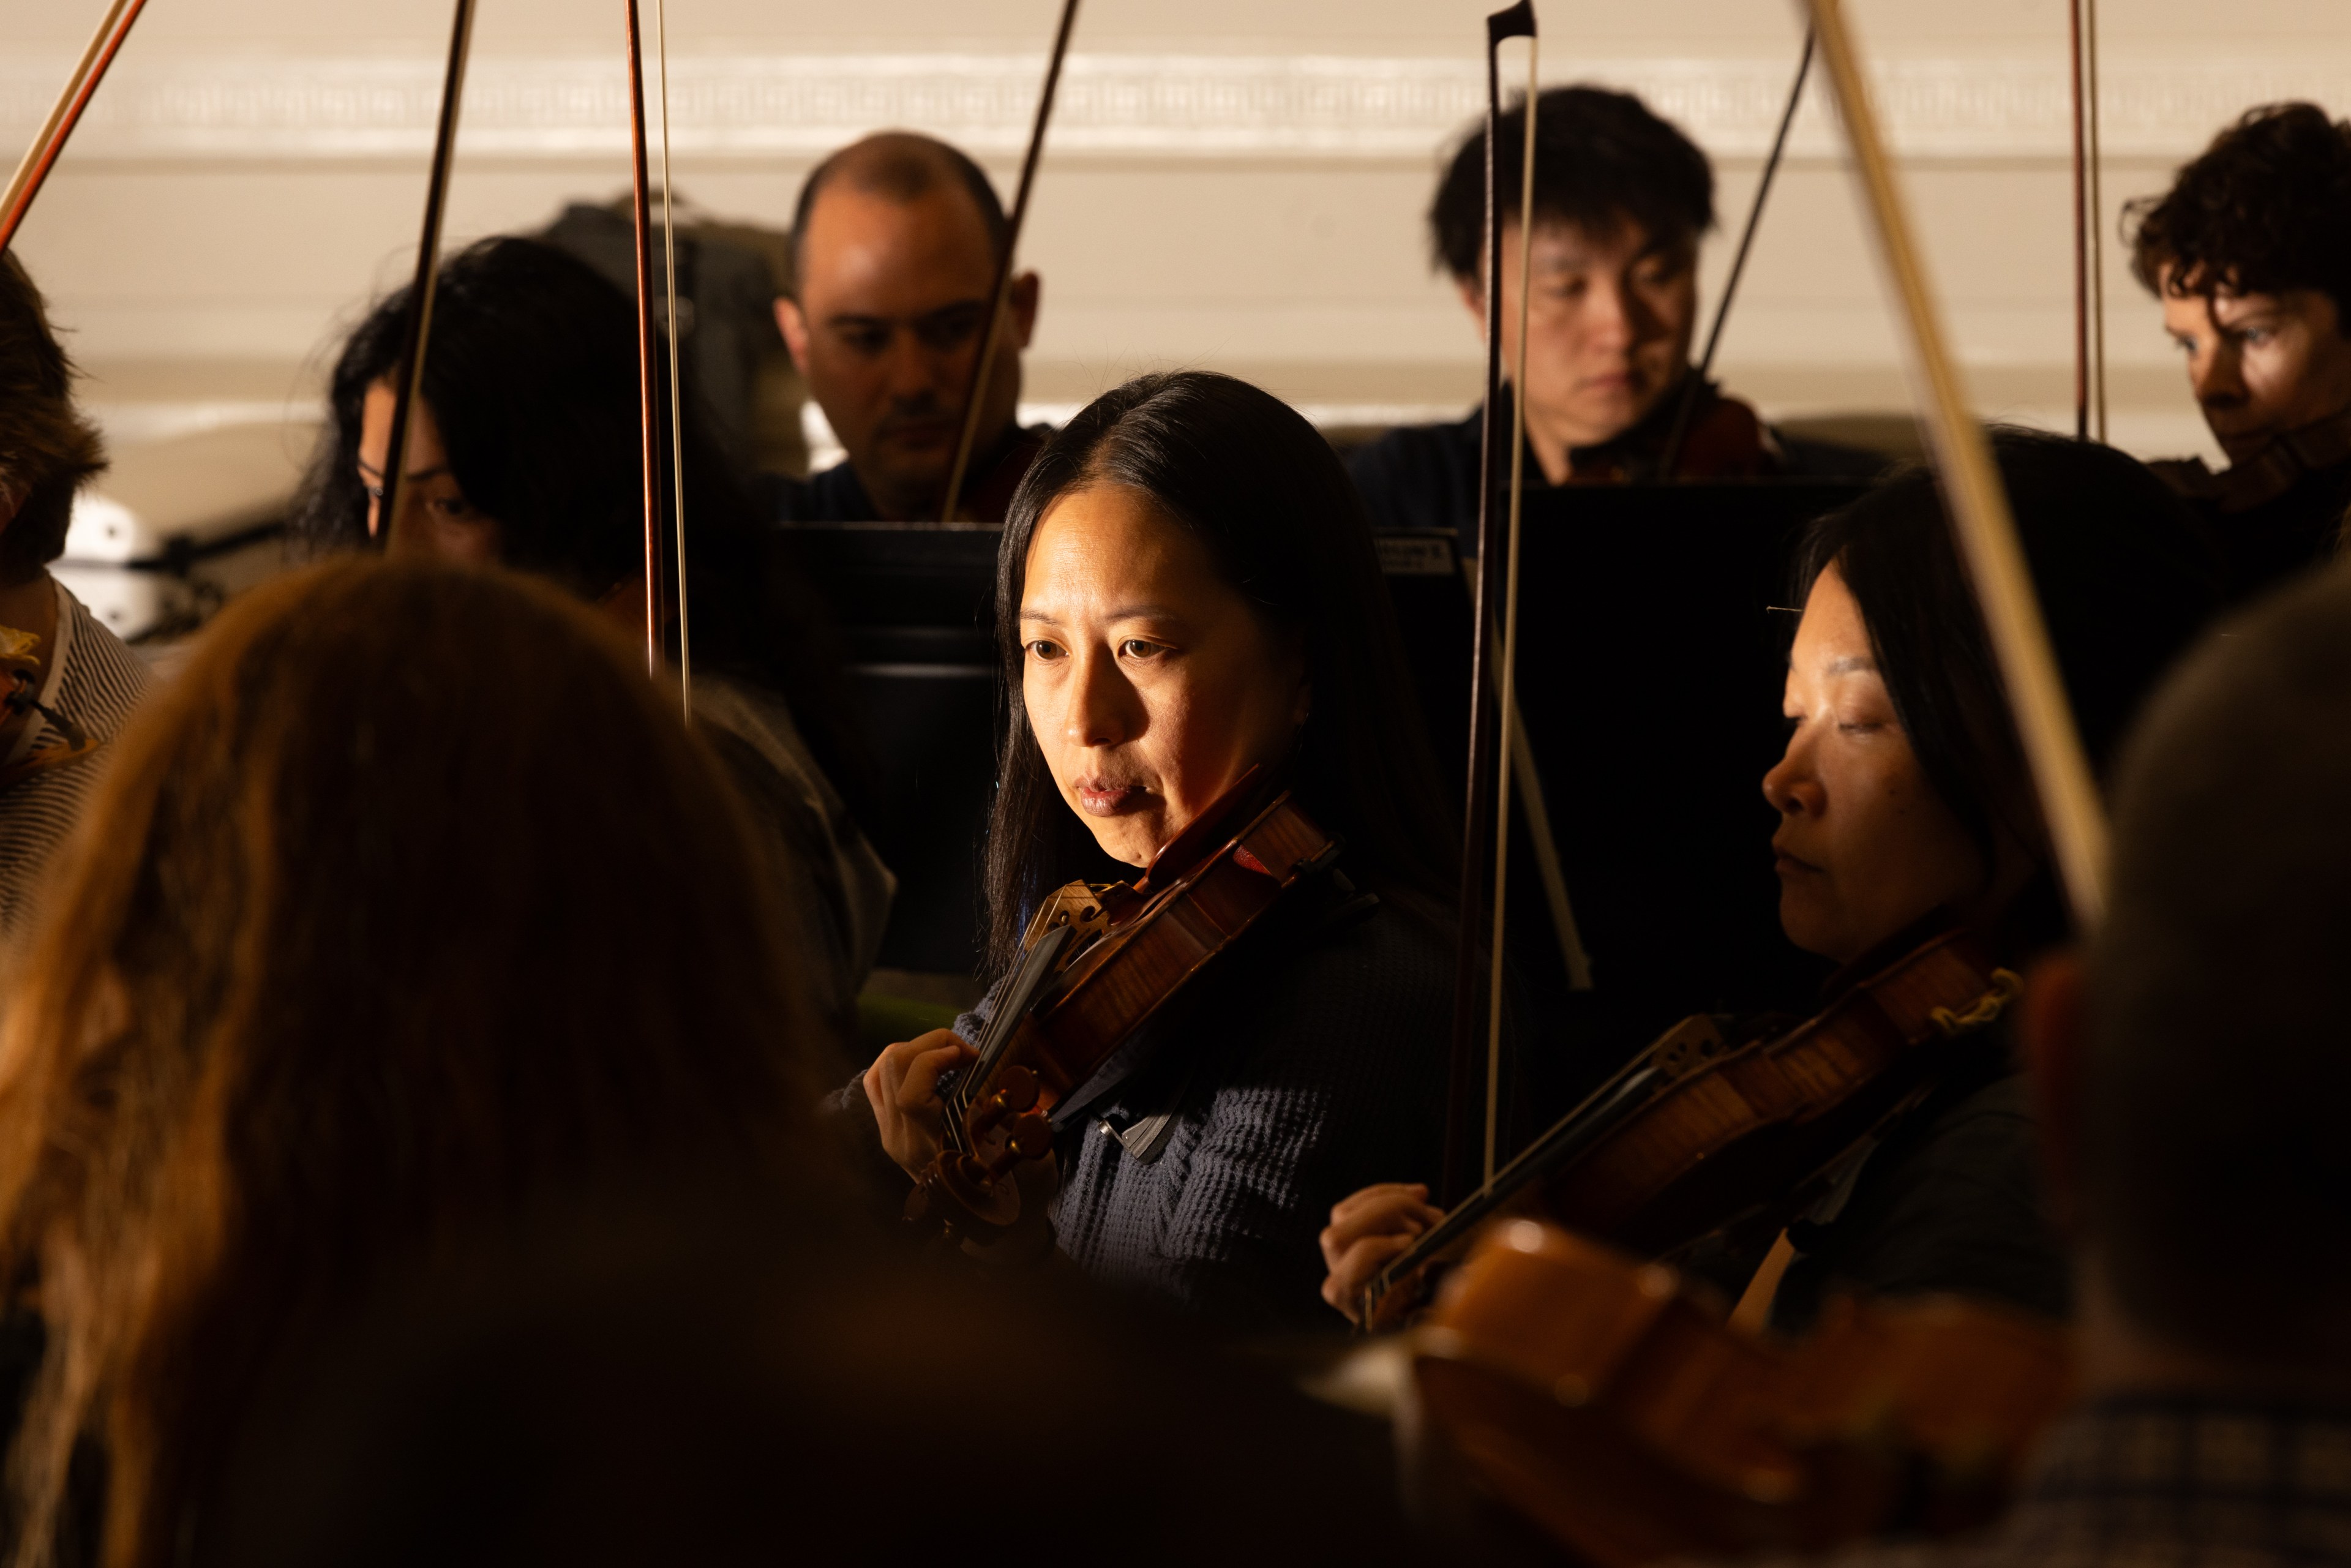 People are playing violins in a dimly lit room, focusing intently on their performance. The spotlight highlights a woman in the foreground.